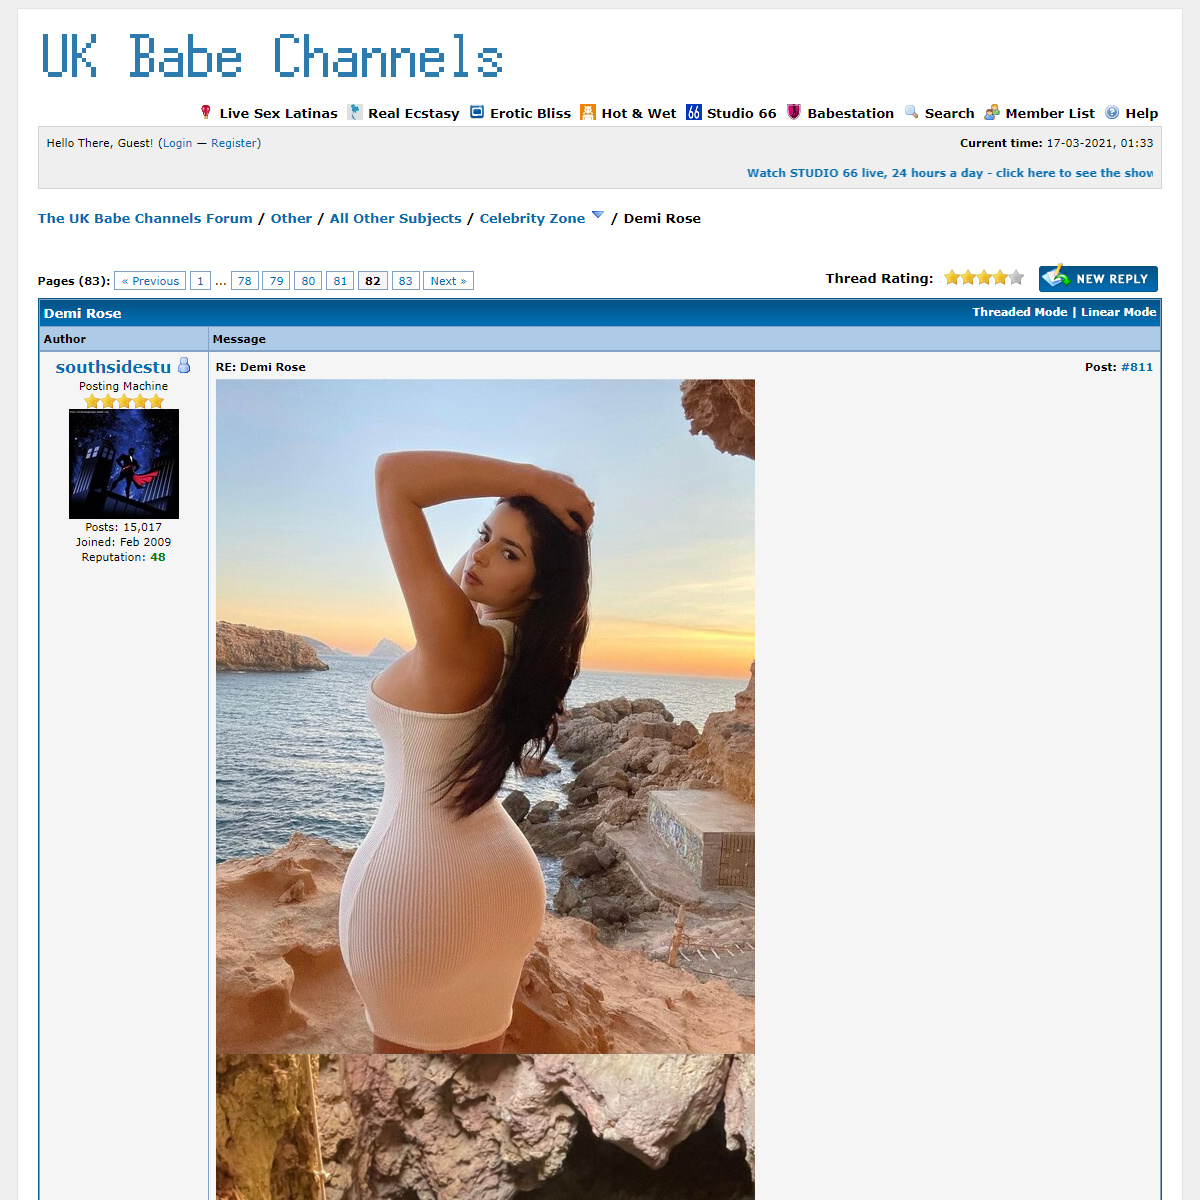 A complete backup of https://www.babeshows.co.uk/showthread.php?tid=71822&pid=2546395